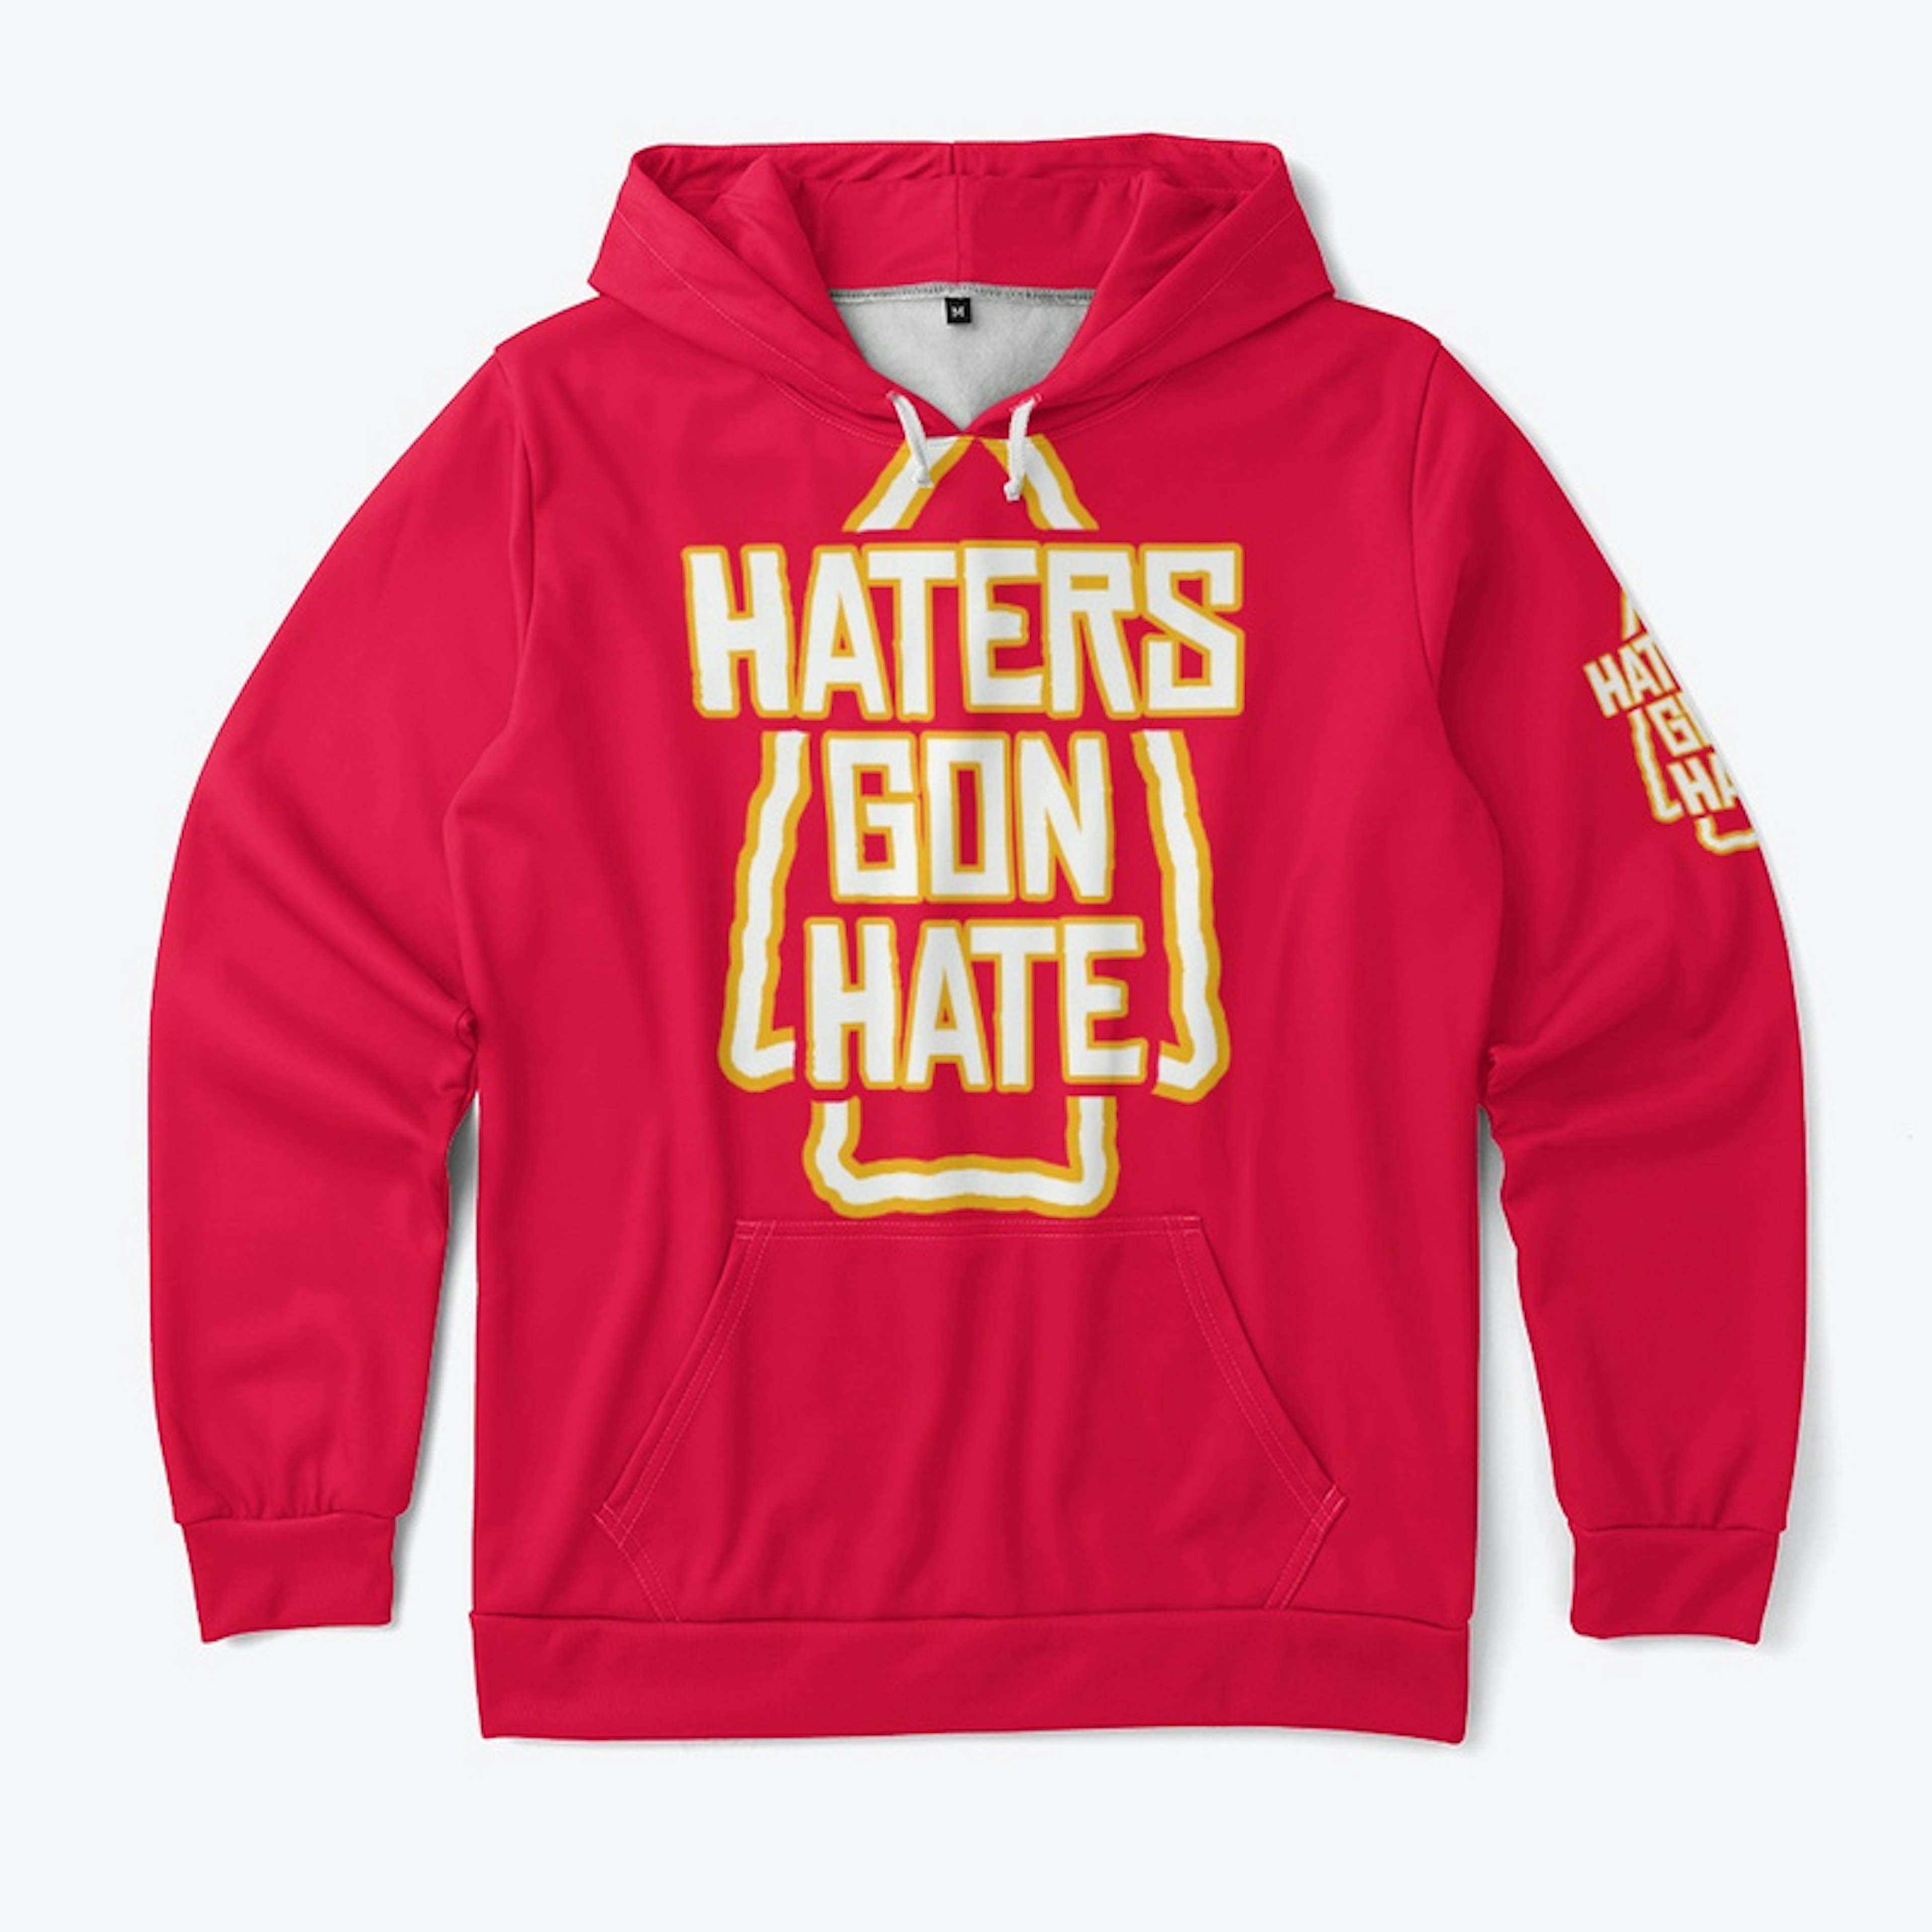 MM - Haters Gon Hate